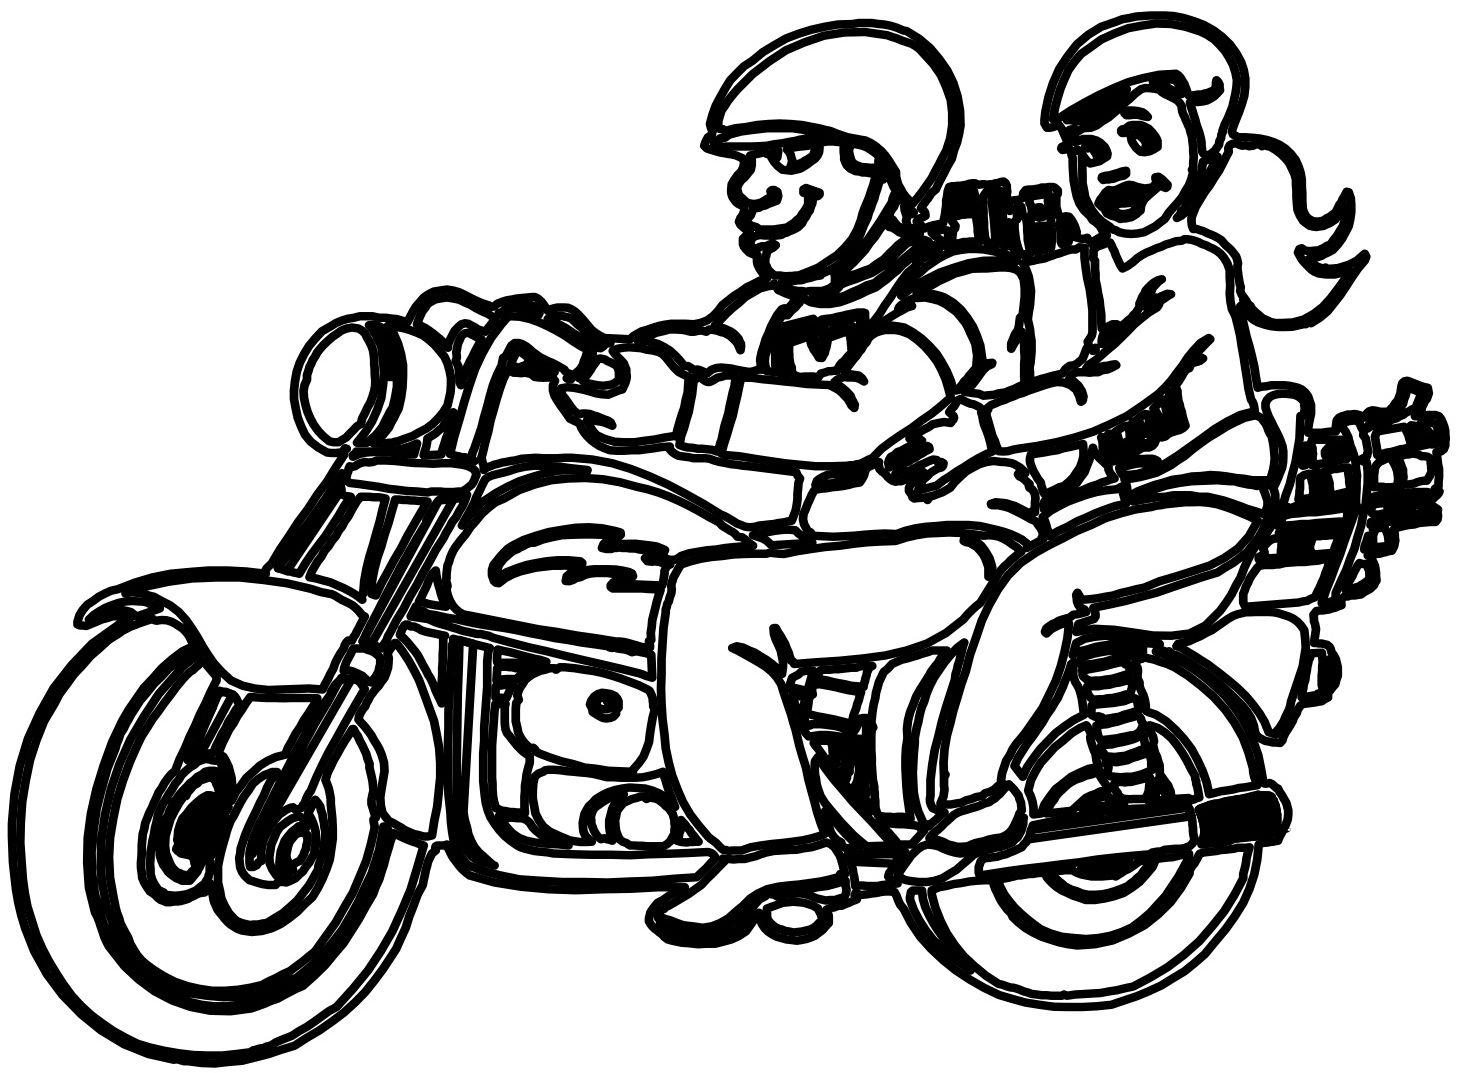 Motorcycle  black and white motorcycle clip art images black and white 8